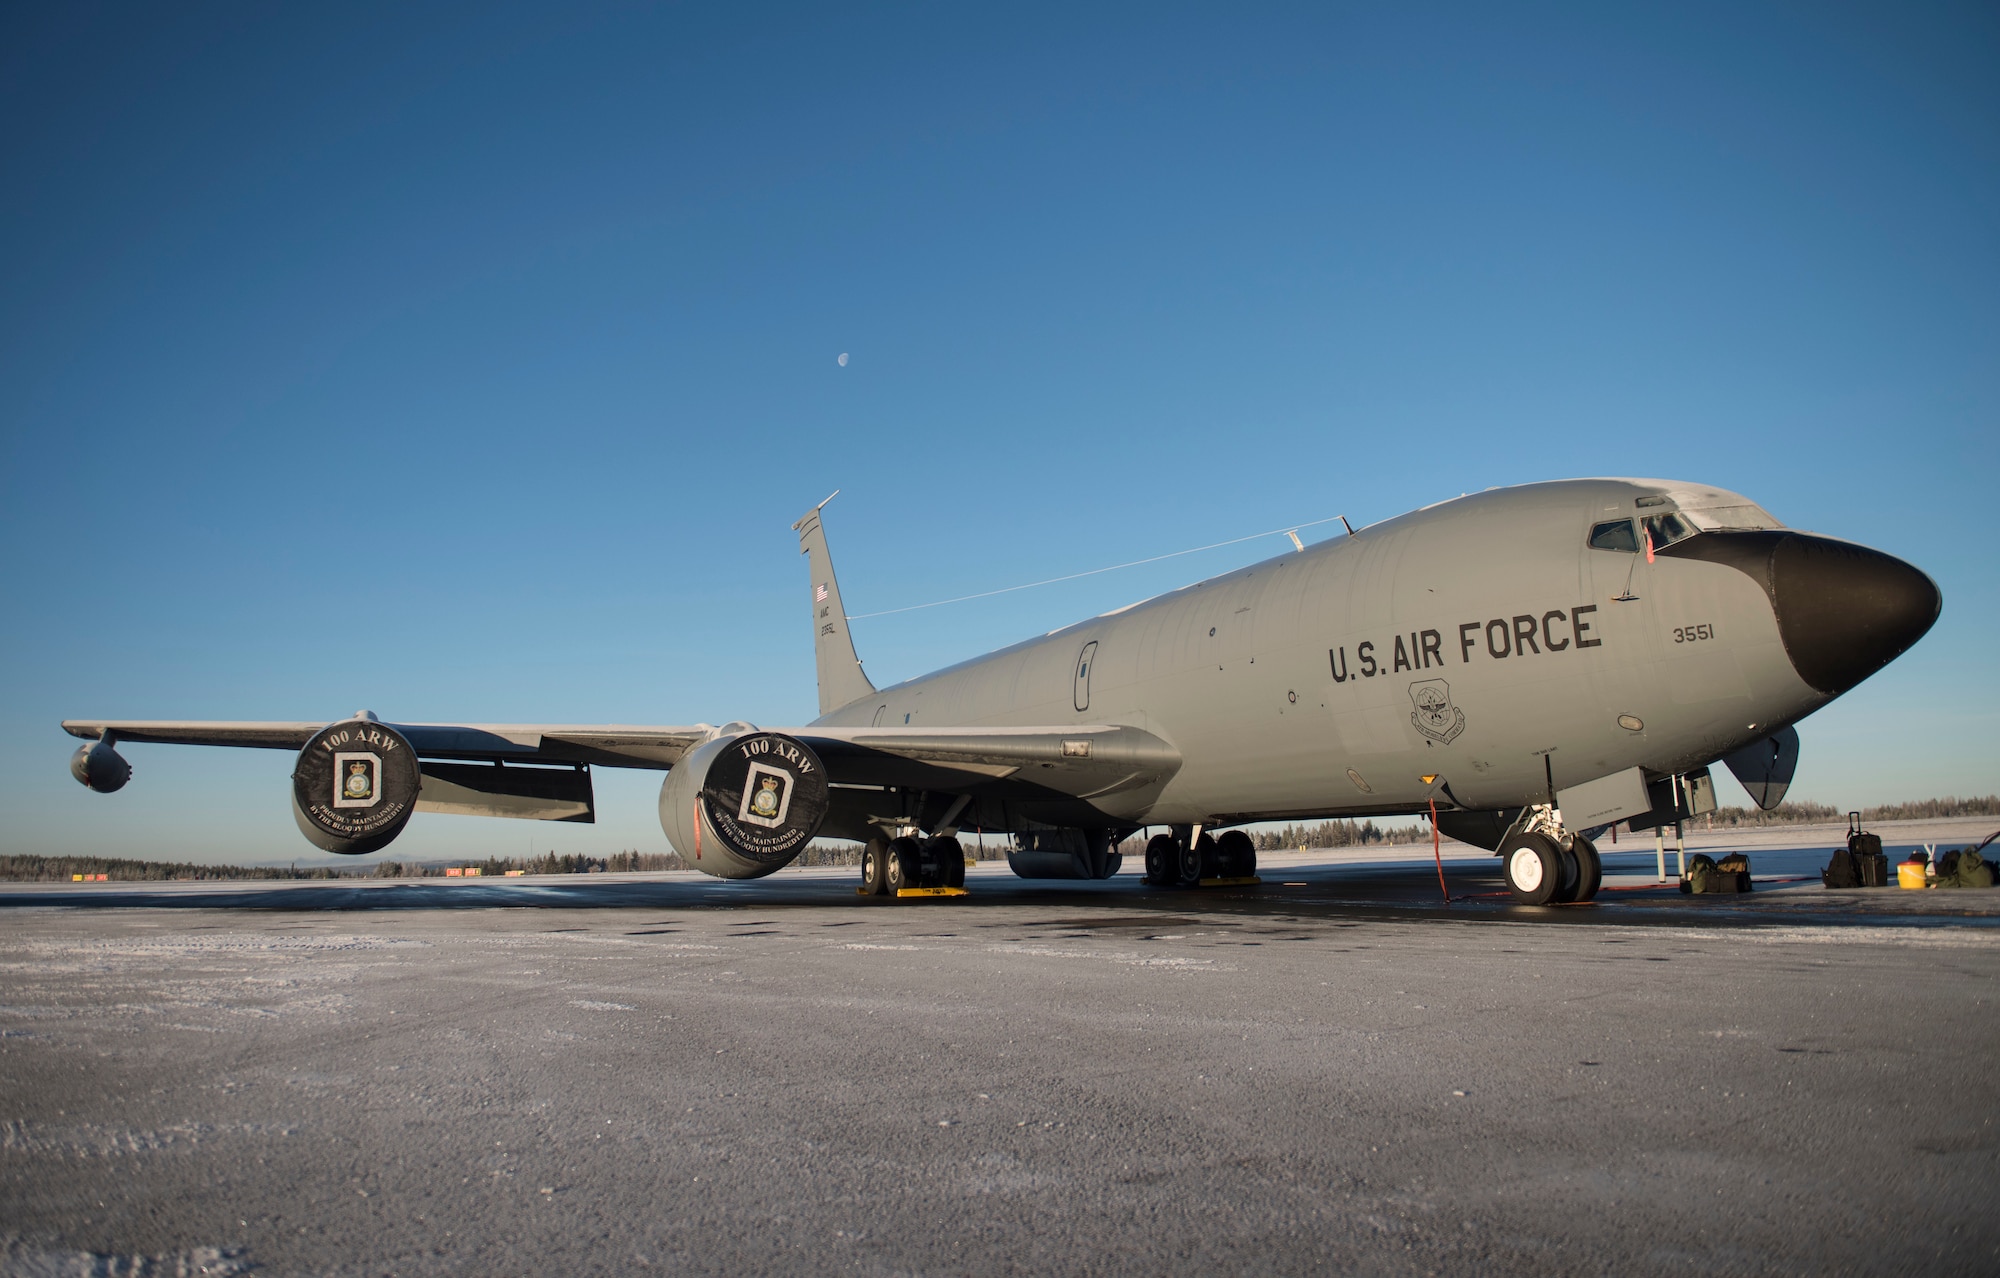 A U.S. Air Force KC-135 Stratotanker parked on the flightline during Exercise Trident Juncture 18, at Rovaniemi, Finland, Oct. 29, 2018. The exercise takes place in Norway and the surrounding areas of the North Atlantic and the Baltic Sea, including Iceland and the airspace of Finland and Sweden. With more than 50,000 participants, this is the largest NATO exercise since 2002. (U.S. Air Force photo by Senior Airman Luke Milano)